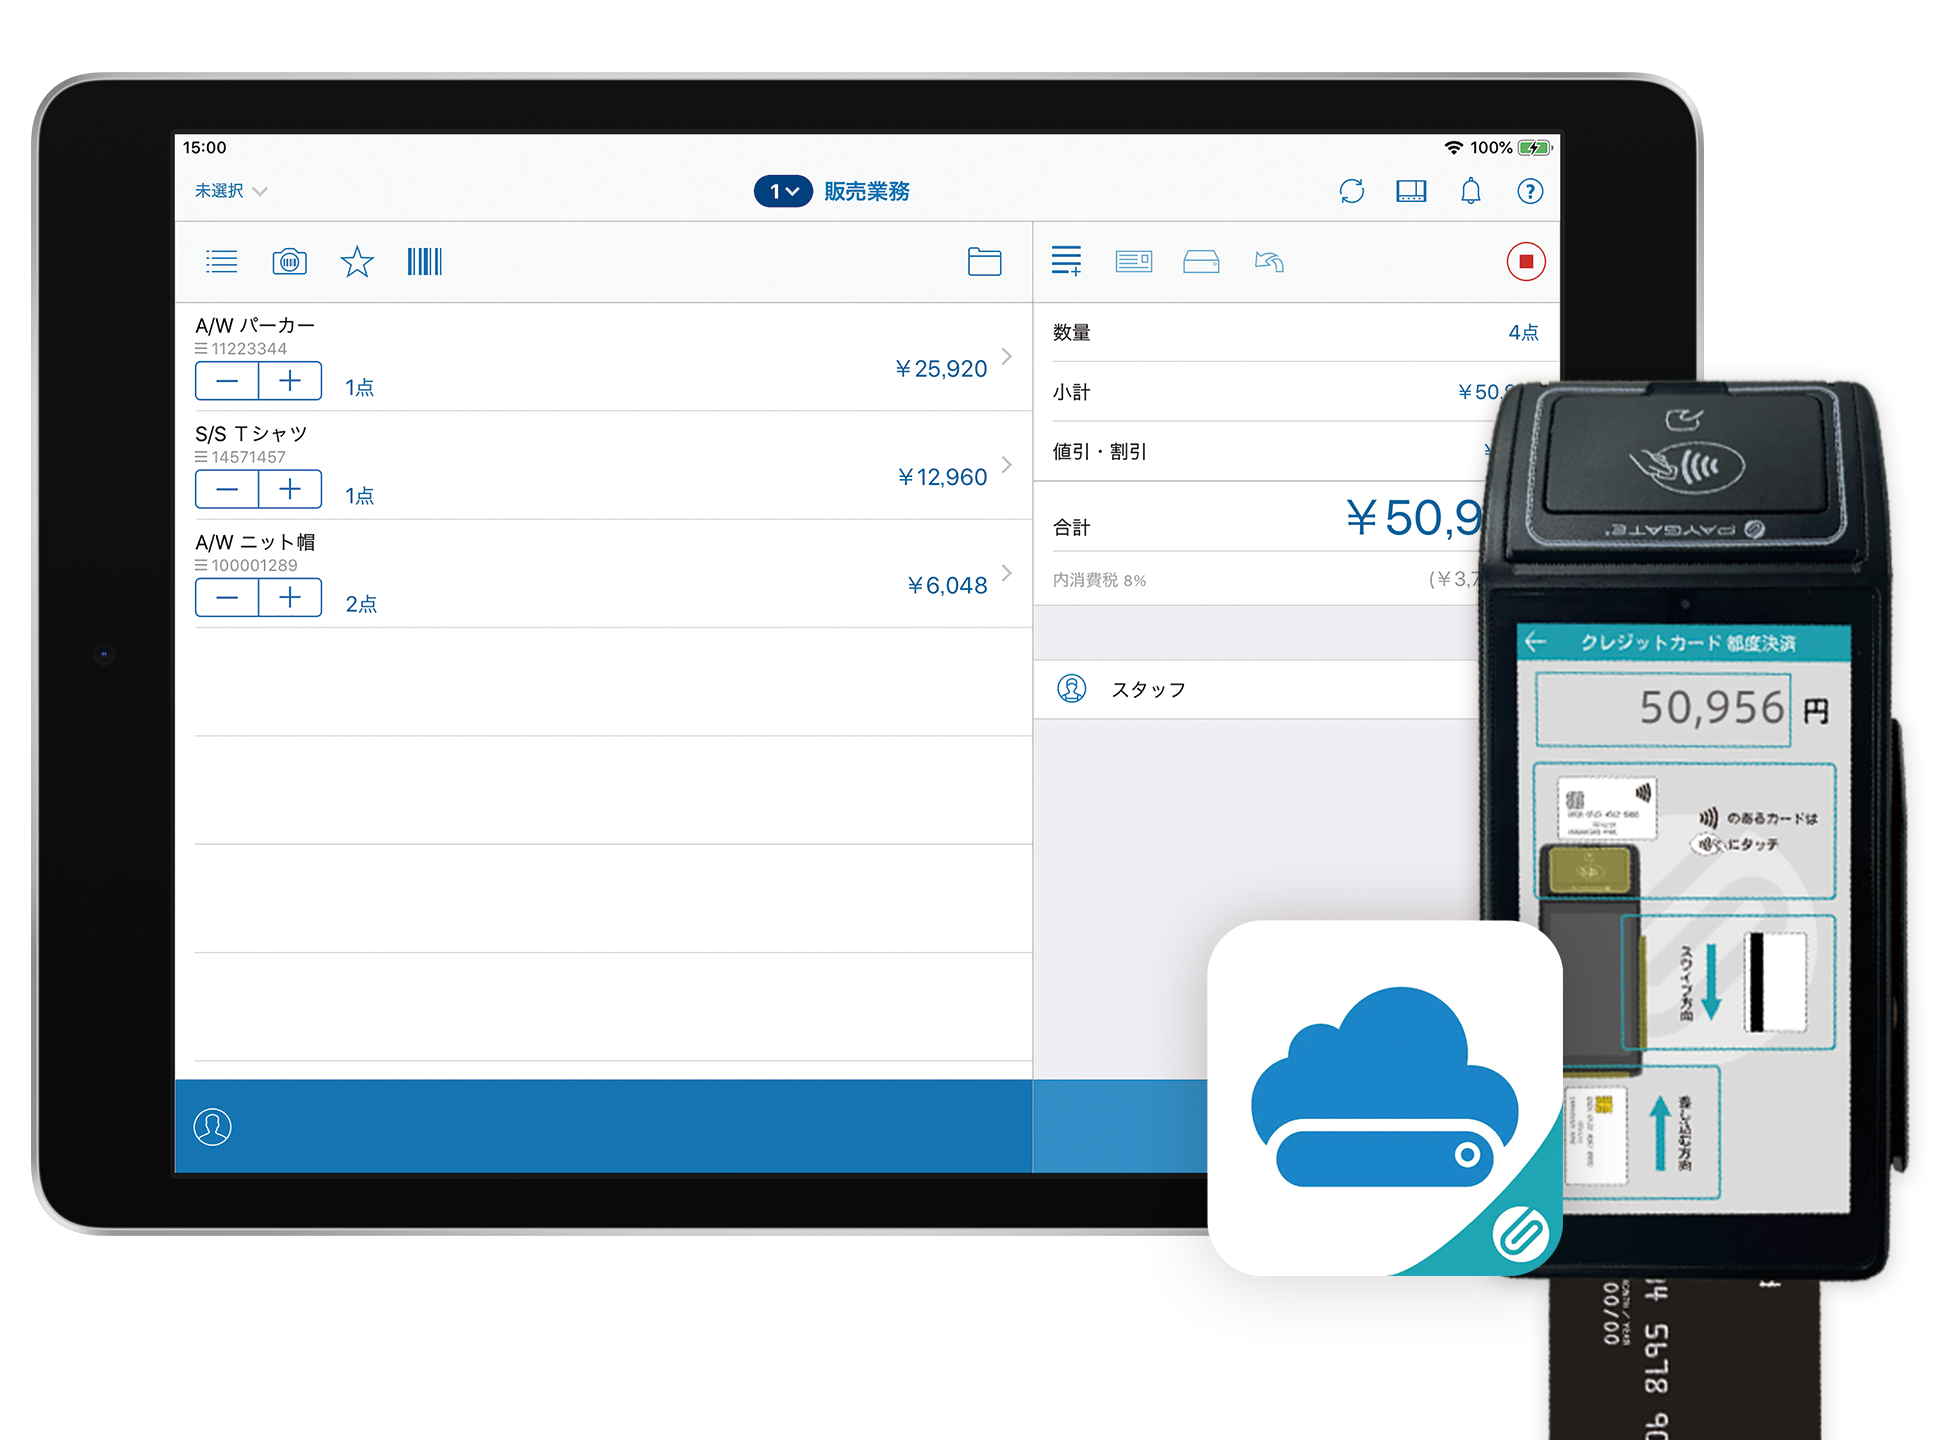 With integration with Smaregi, double processing is no longer necessary. Plus, if you install the dedicated app `PAYGATE POS` into the payment terminal, settlement operations can be done all in one place.